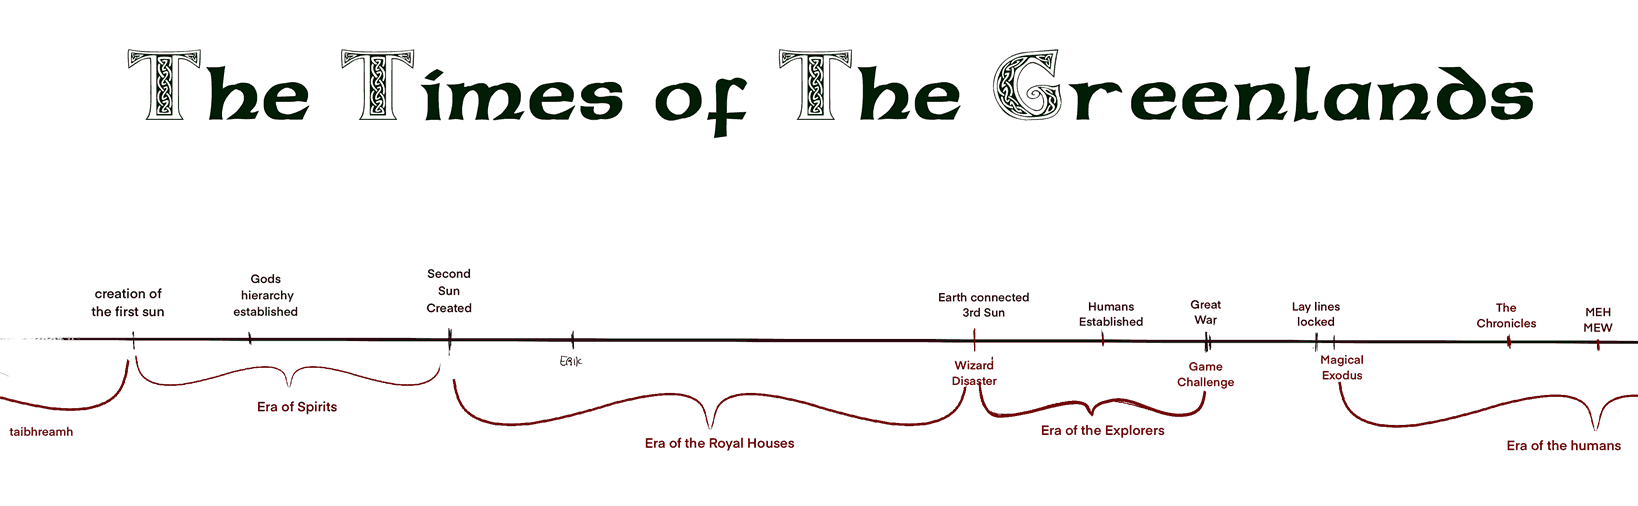 The Greenlands - a timeline